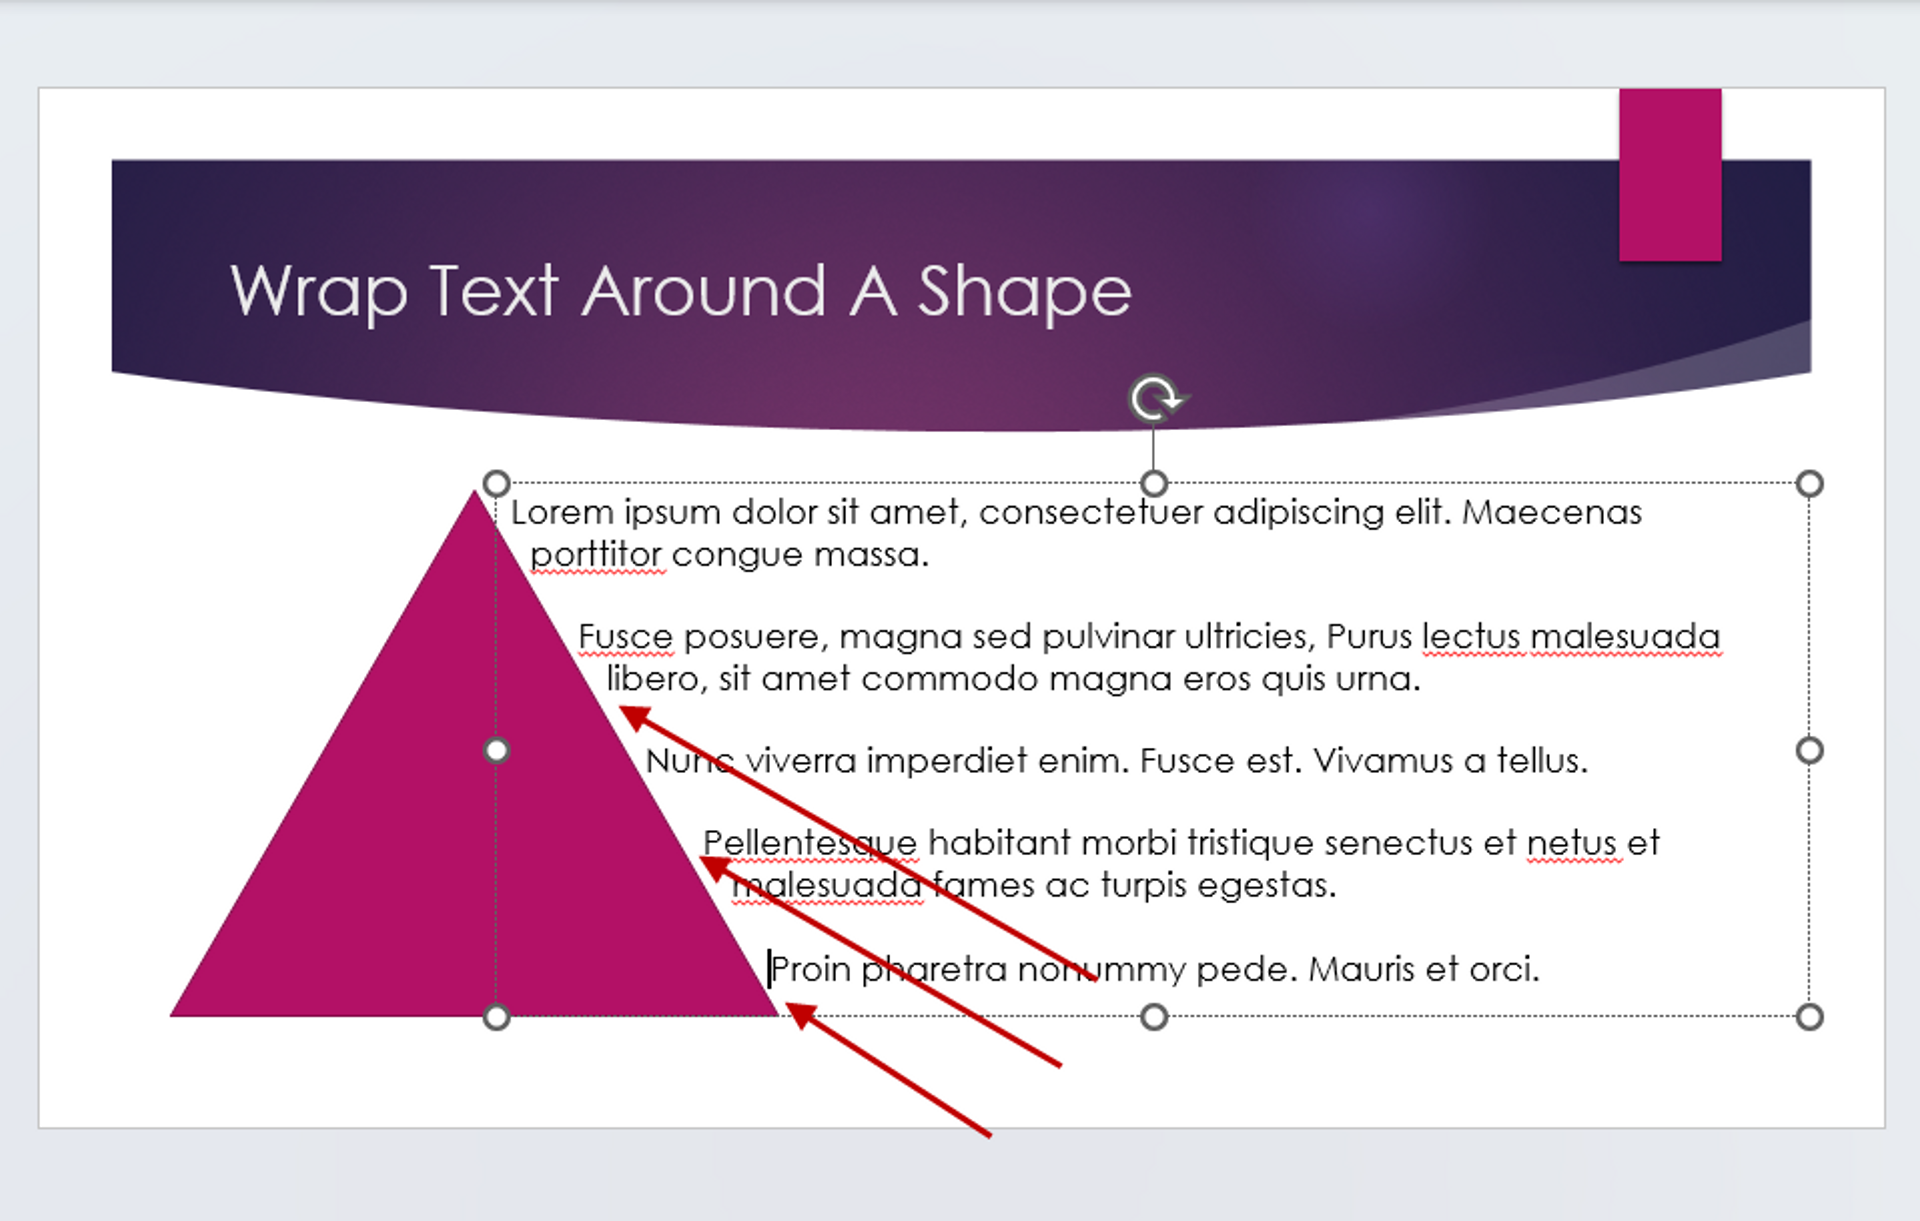 Text wrapped around a shape in MS PowerPoint